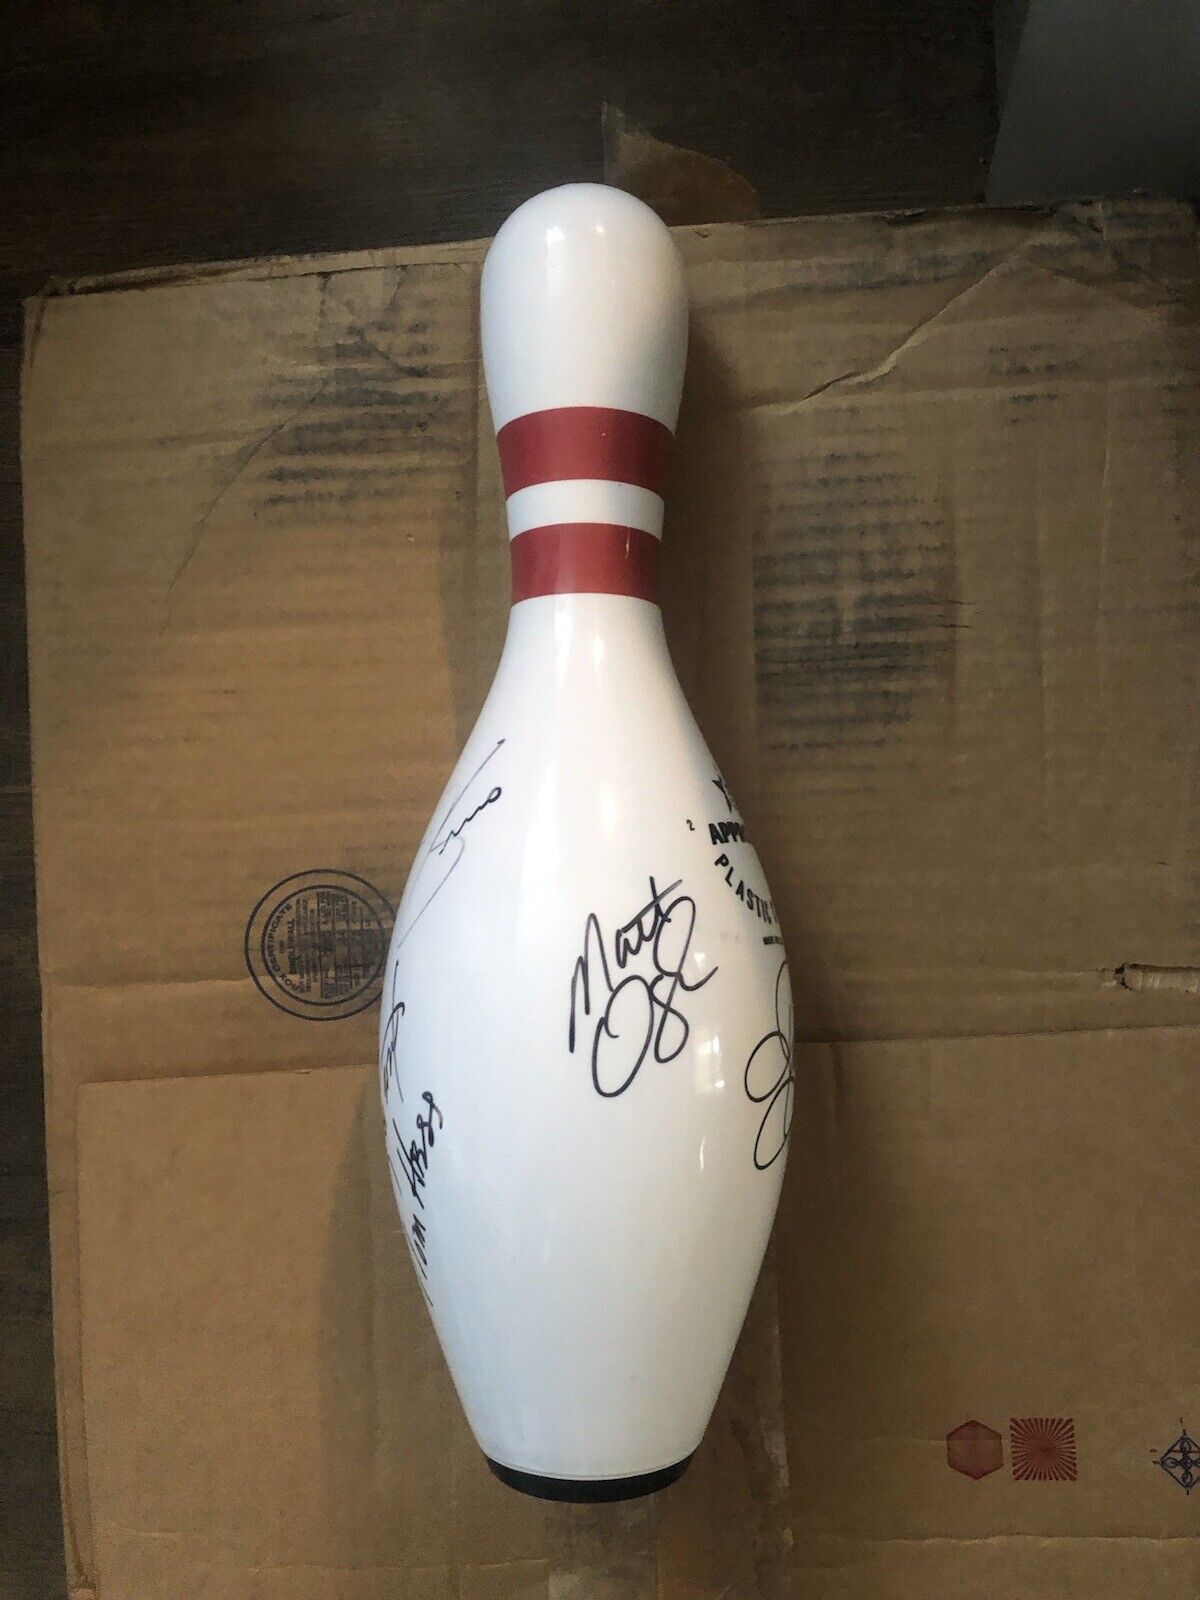 PBA Autographed Bowling Pin: Includes Belmo, Troup, Prather And Others